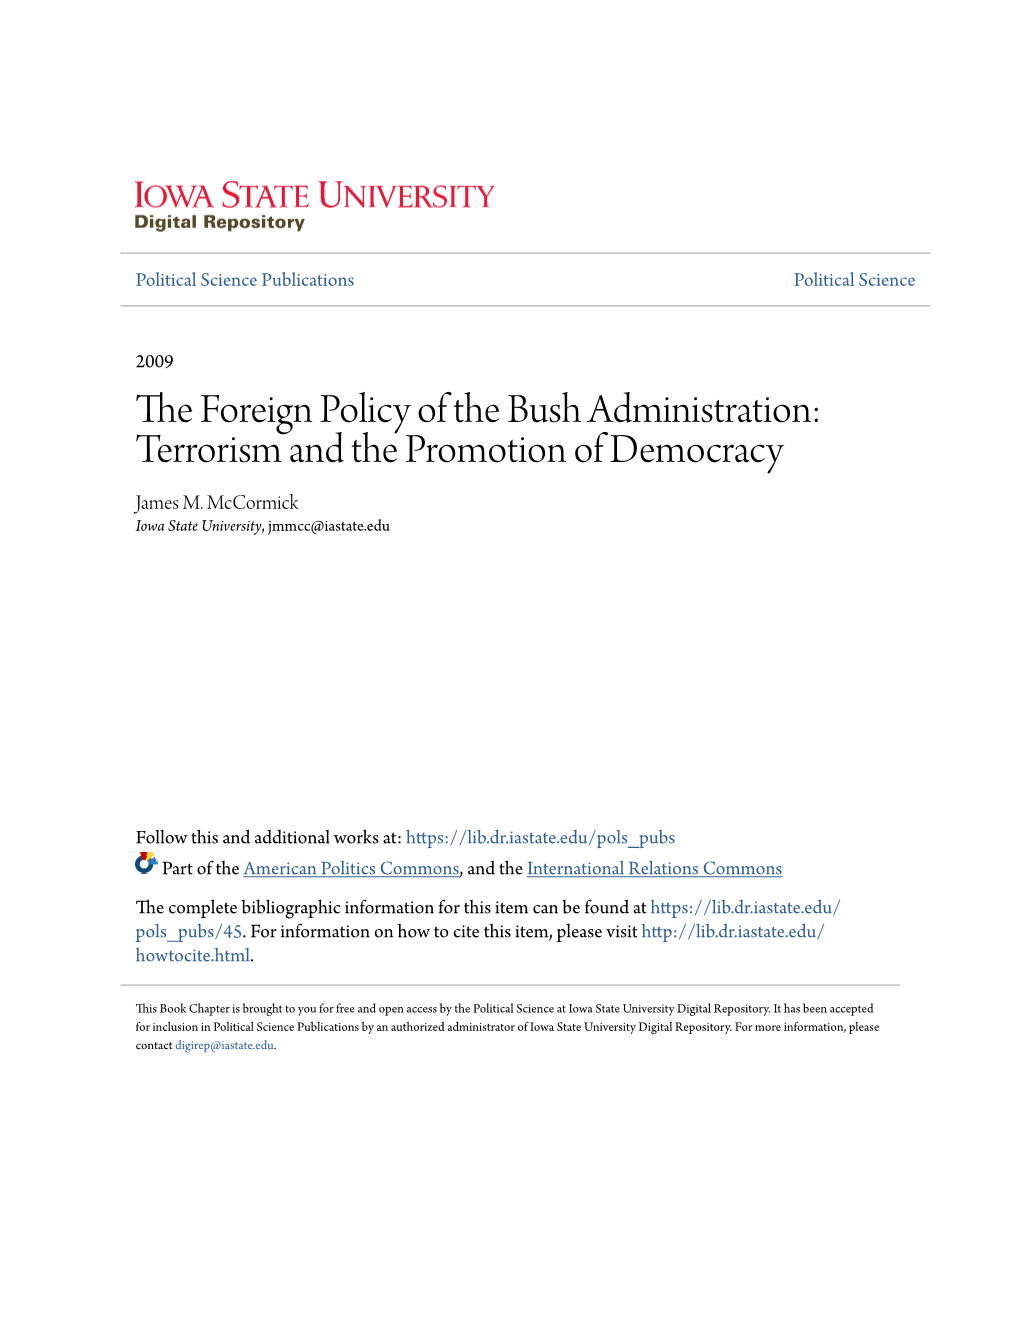 The Foreign Policy of the Bush Administration: Terrorism and The